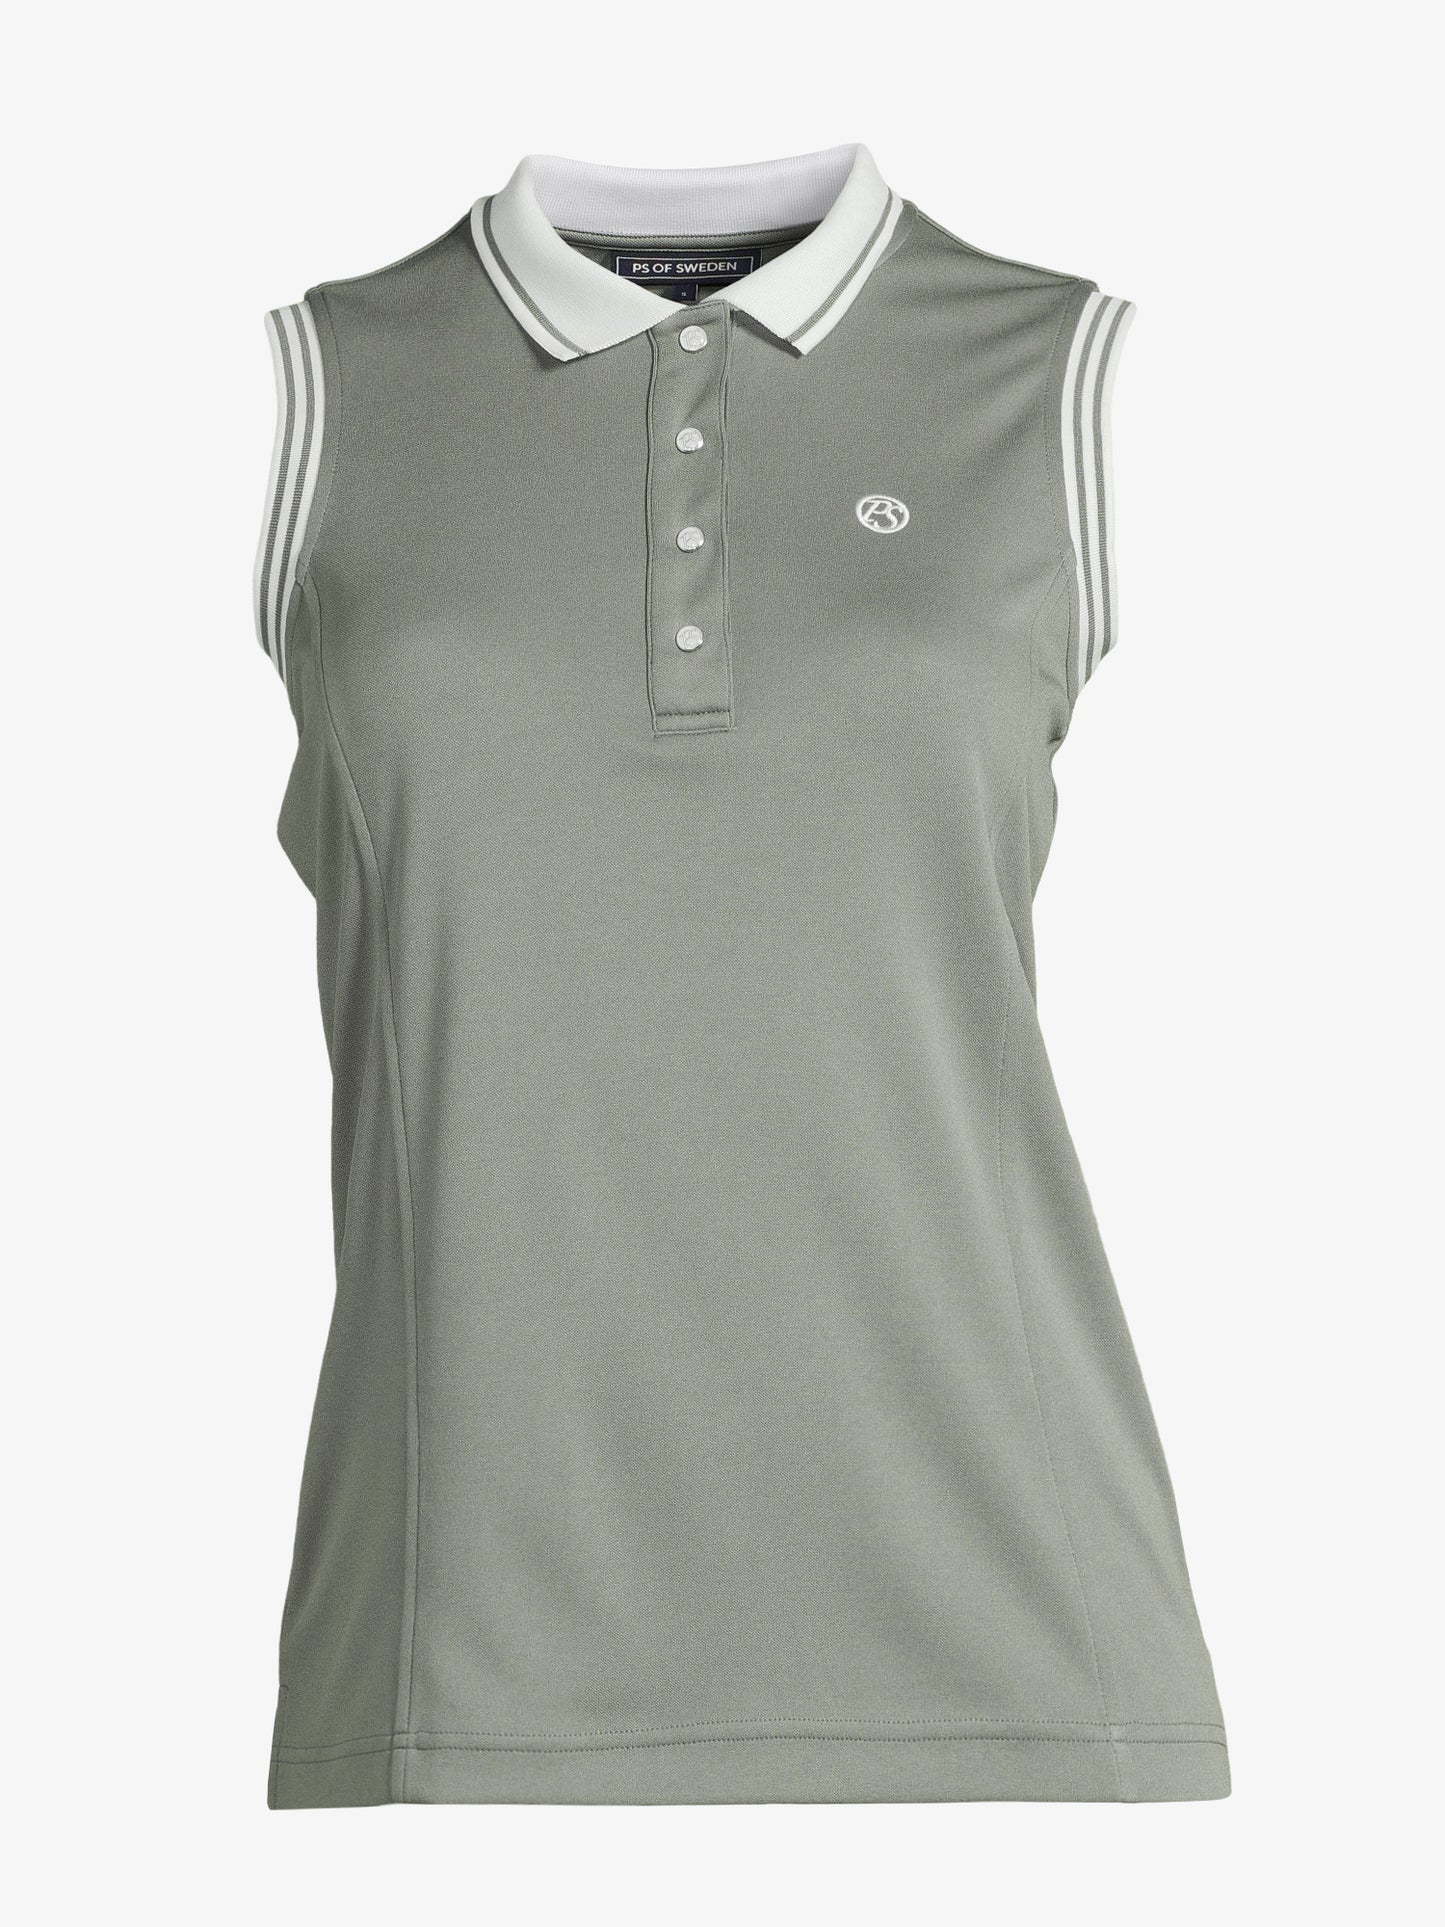 PS of Sweden Summer 21 Minna Sleeveless Polo Top | Sand, Thyme, Roseberry, Grey